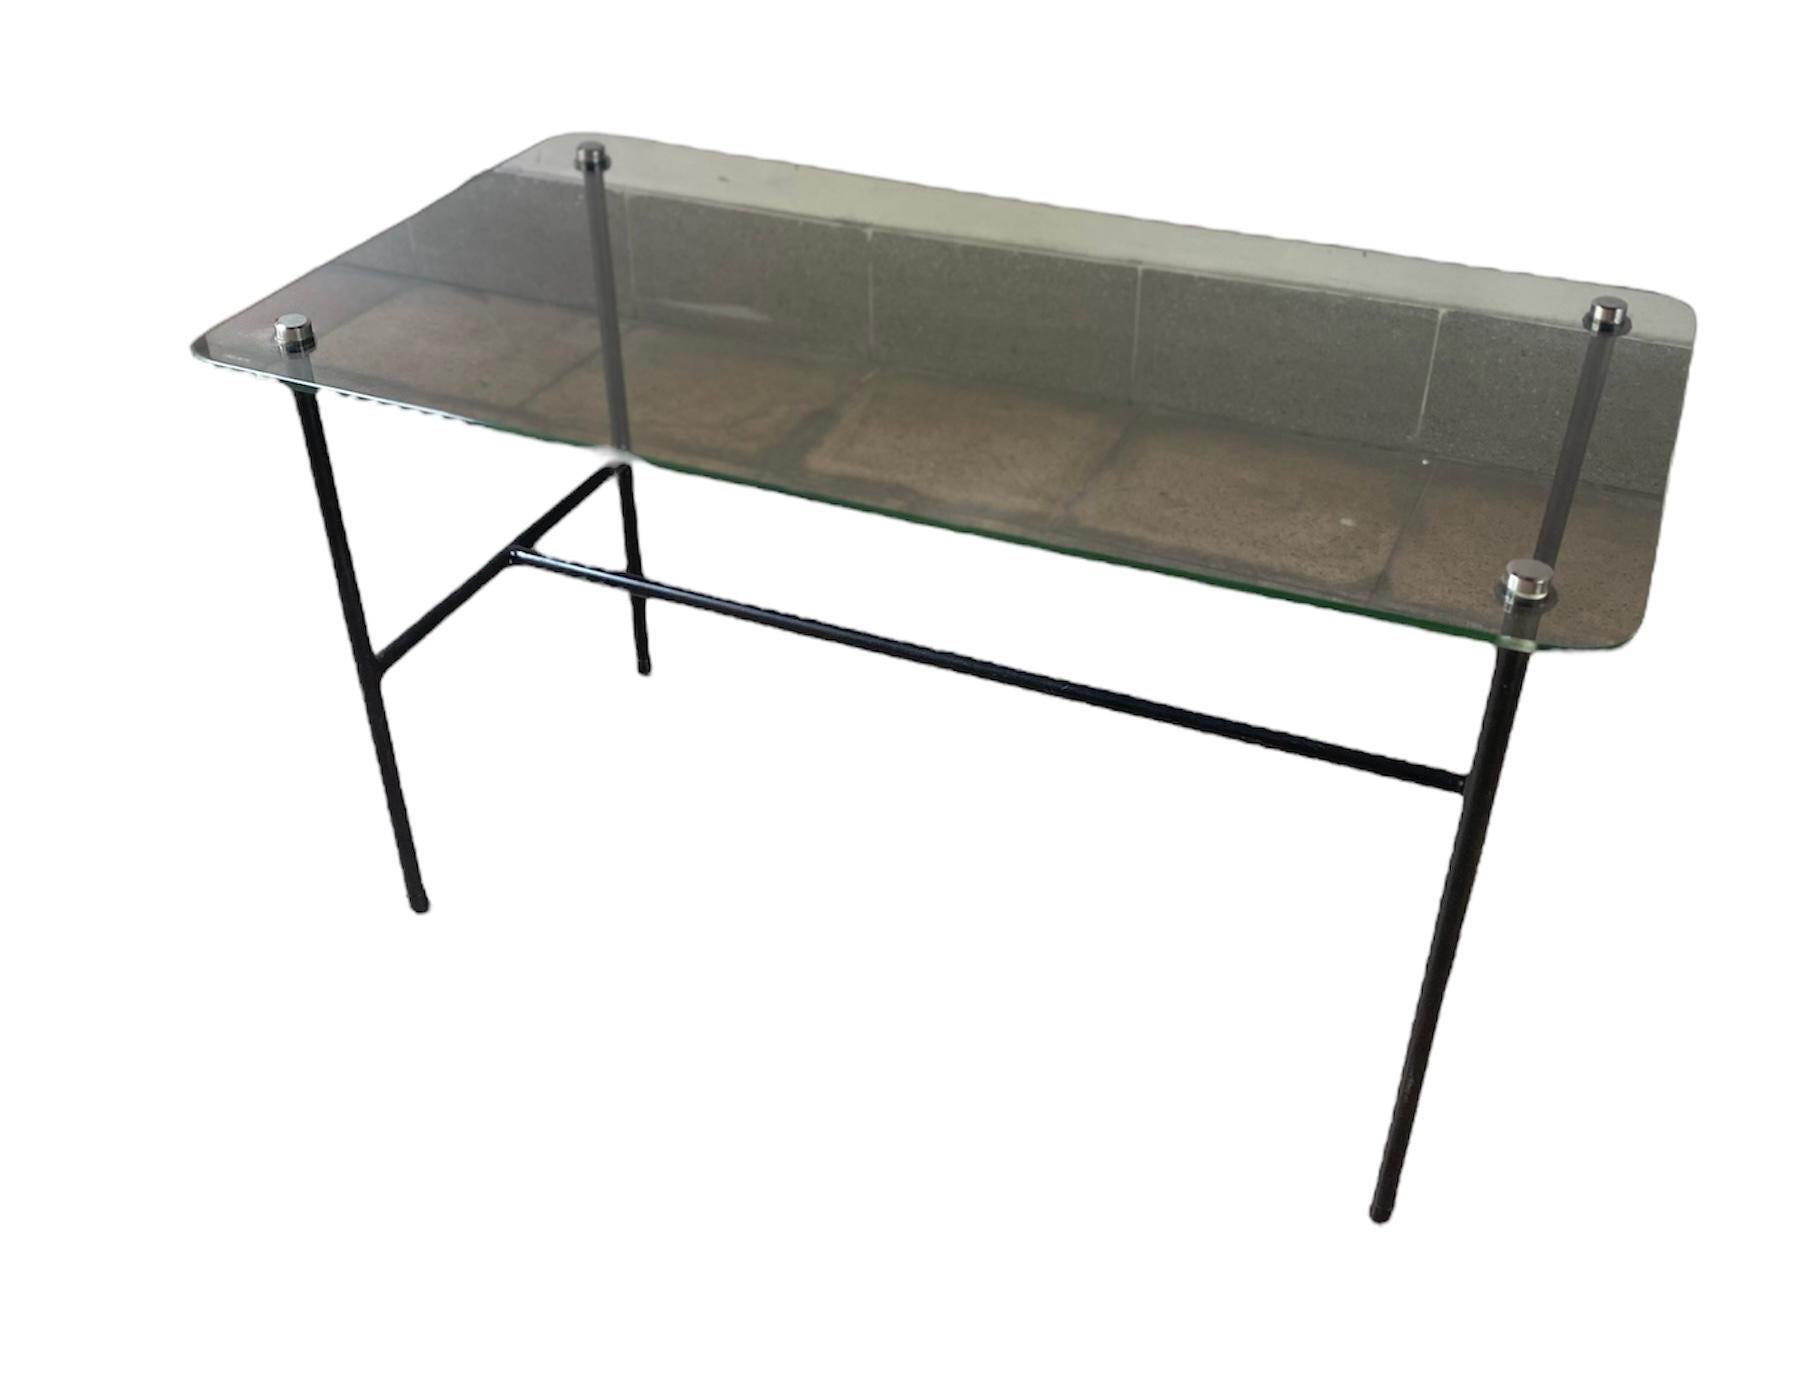 French Coffee Table Disderot Glass and Steel, Pierre Guariche, 1950 For Sale 7